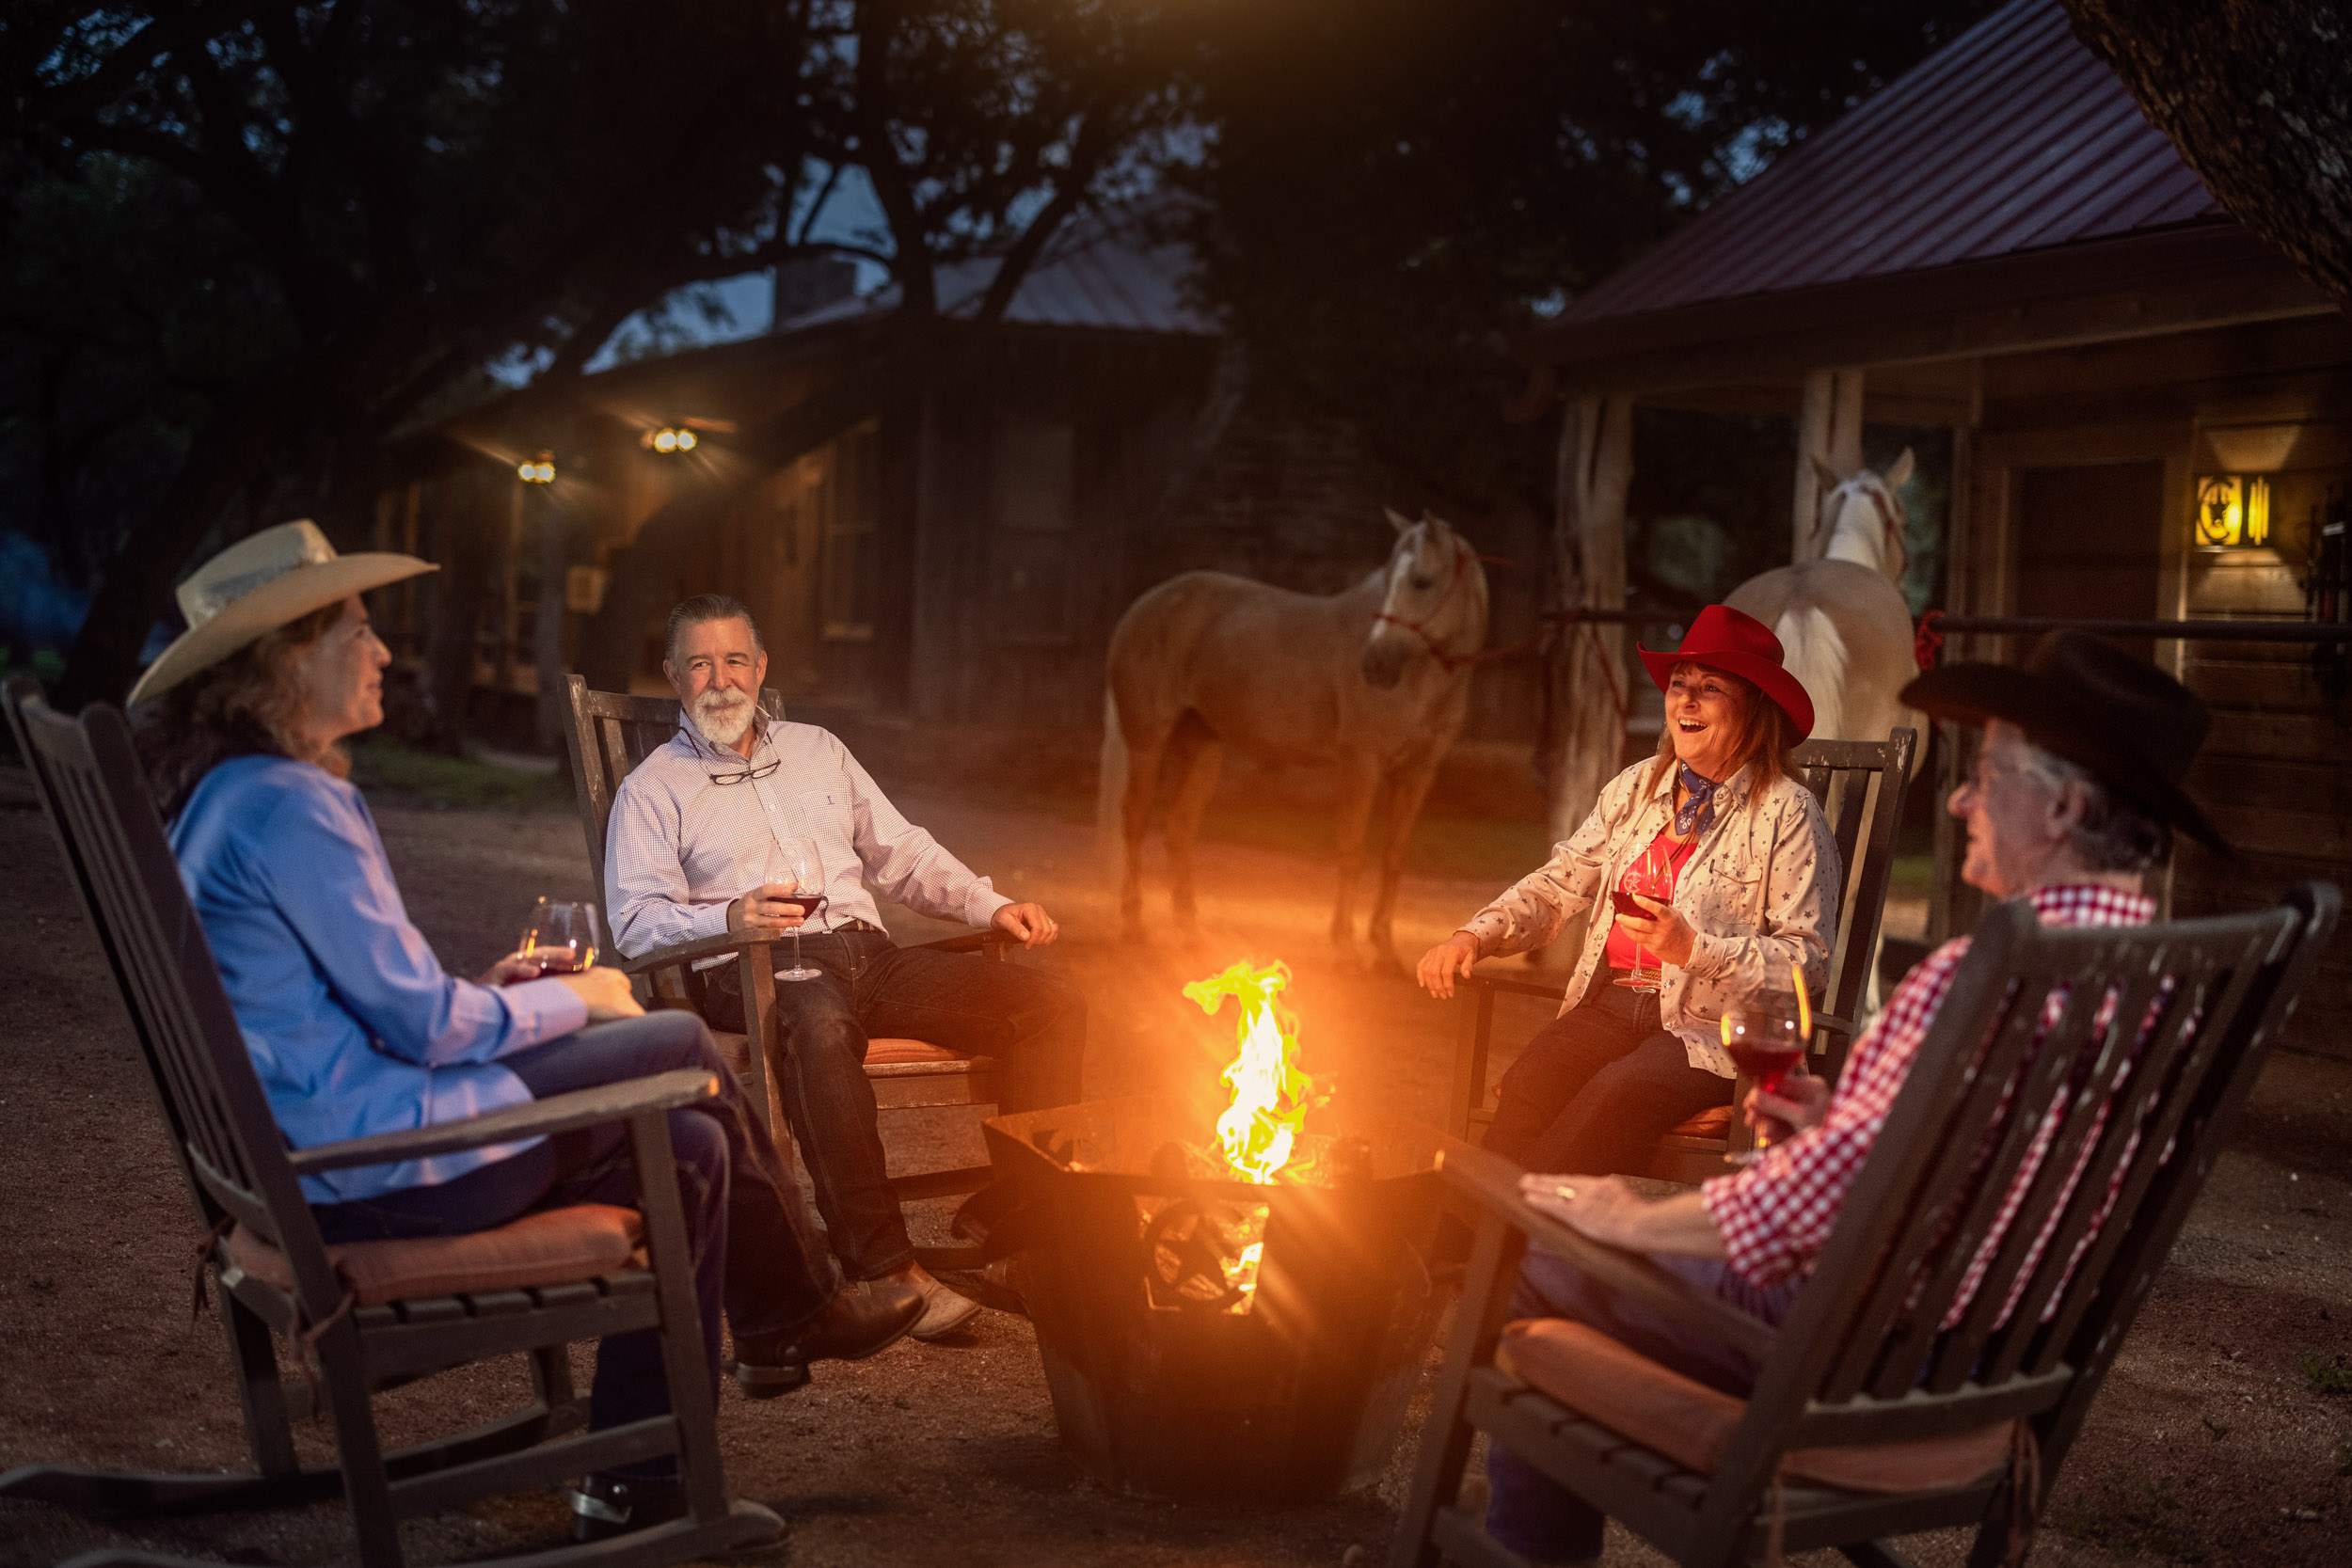 four people sitting around campfire at night with horses in background